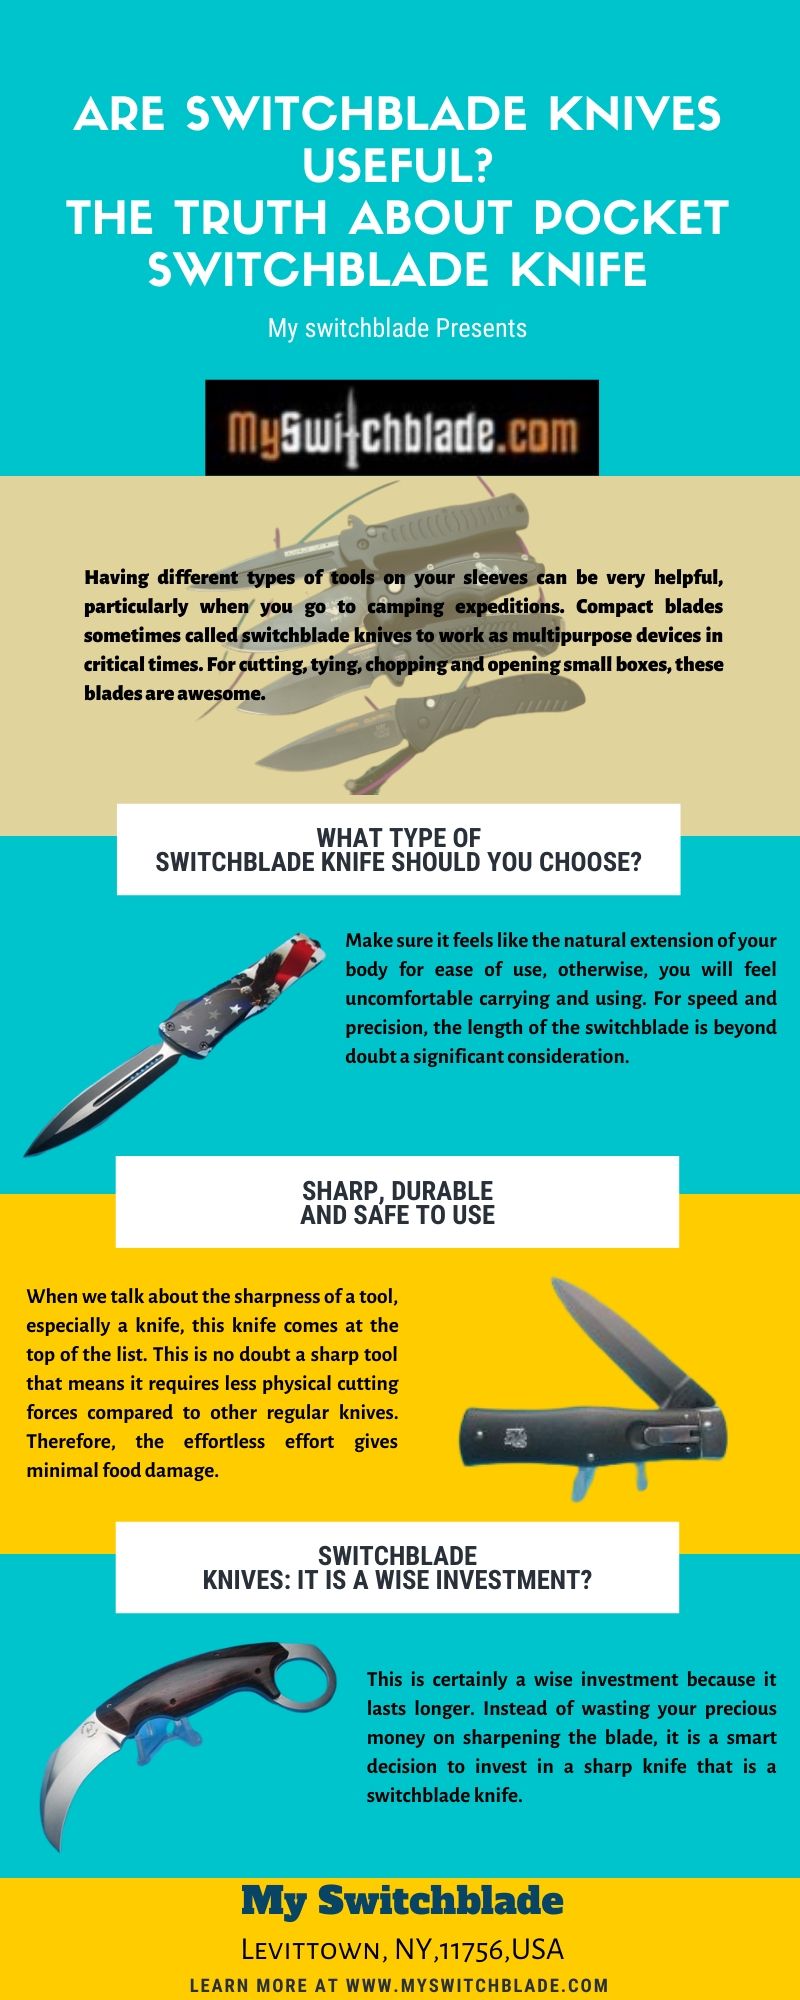 Are Switchblade Knives Useful_ The Truth about Pocket Switchblade Knife.jpg  by Myswitchblade